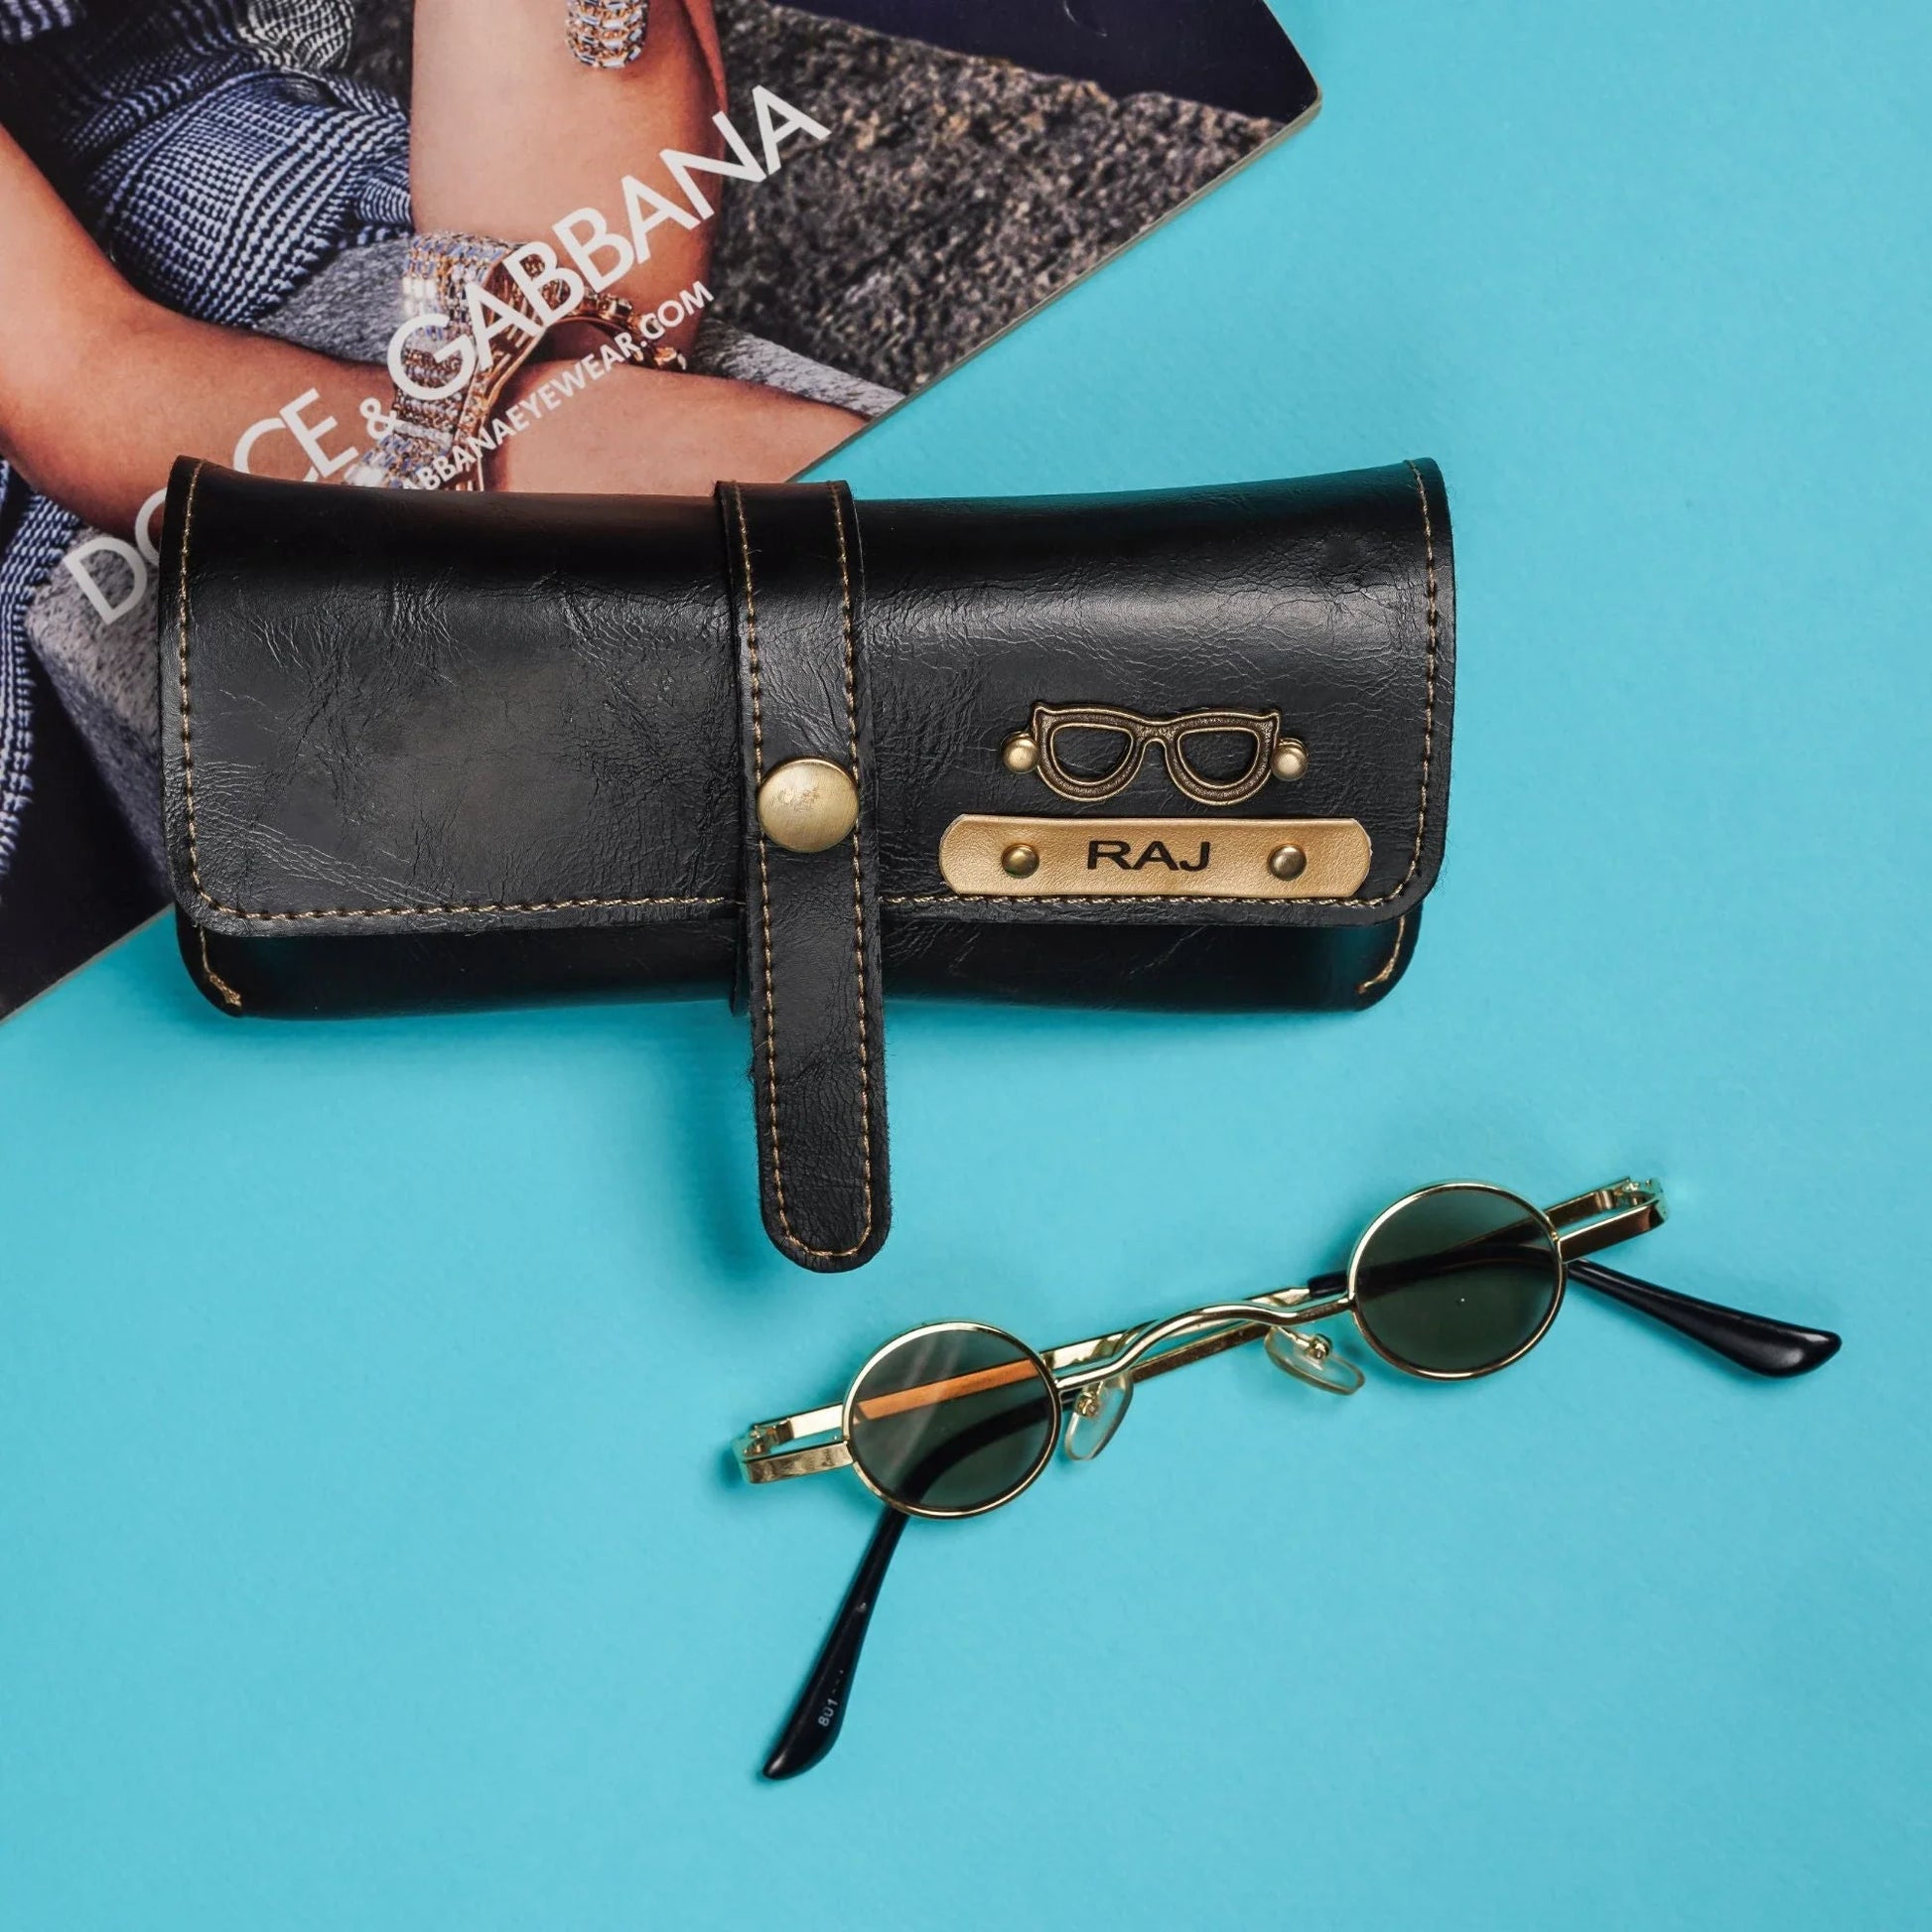 Protect your sunglasses in style with our customized sunglasses case! Made from high-quality materials and available in a variety of colors and styles, this case can be personalized with your choice of initials, monogram or design.